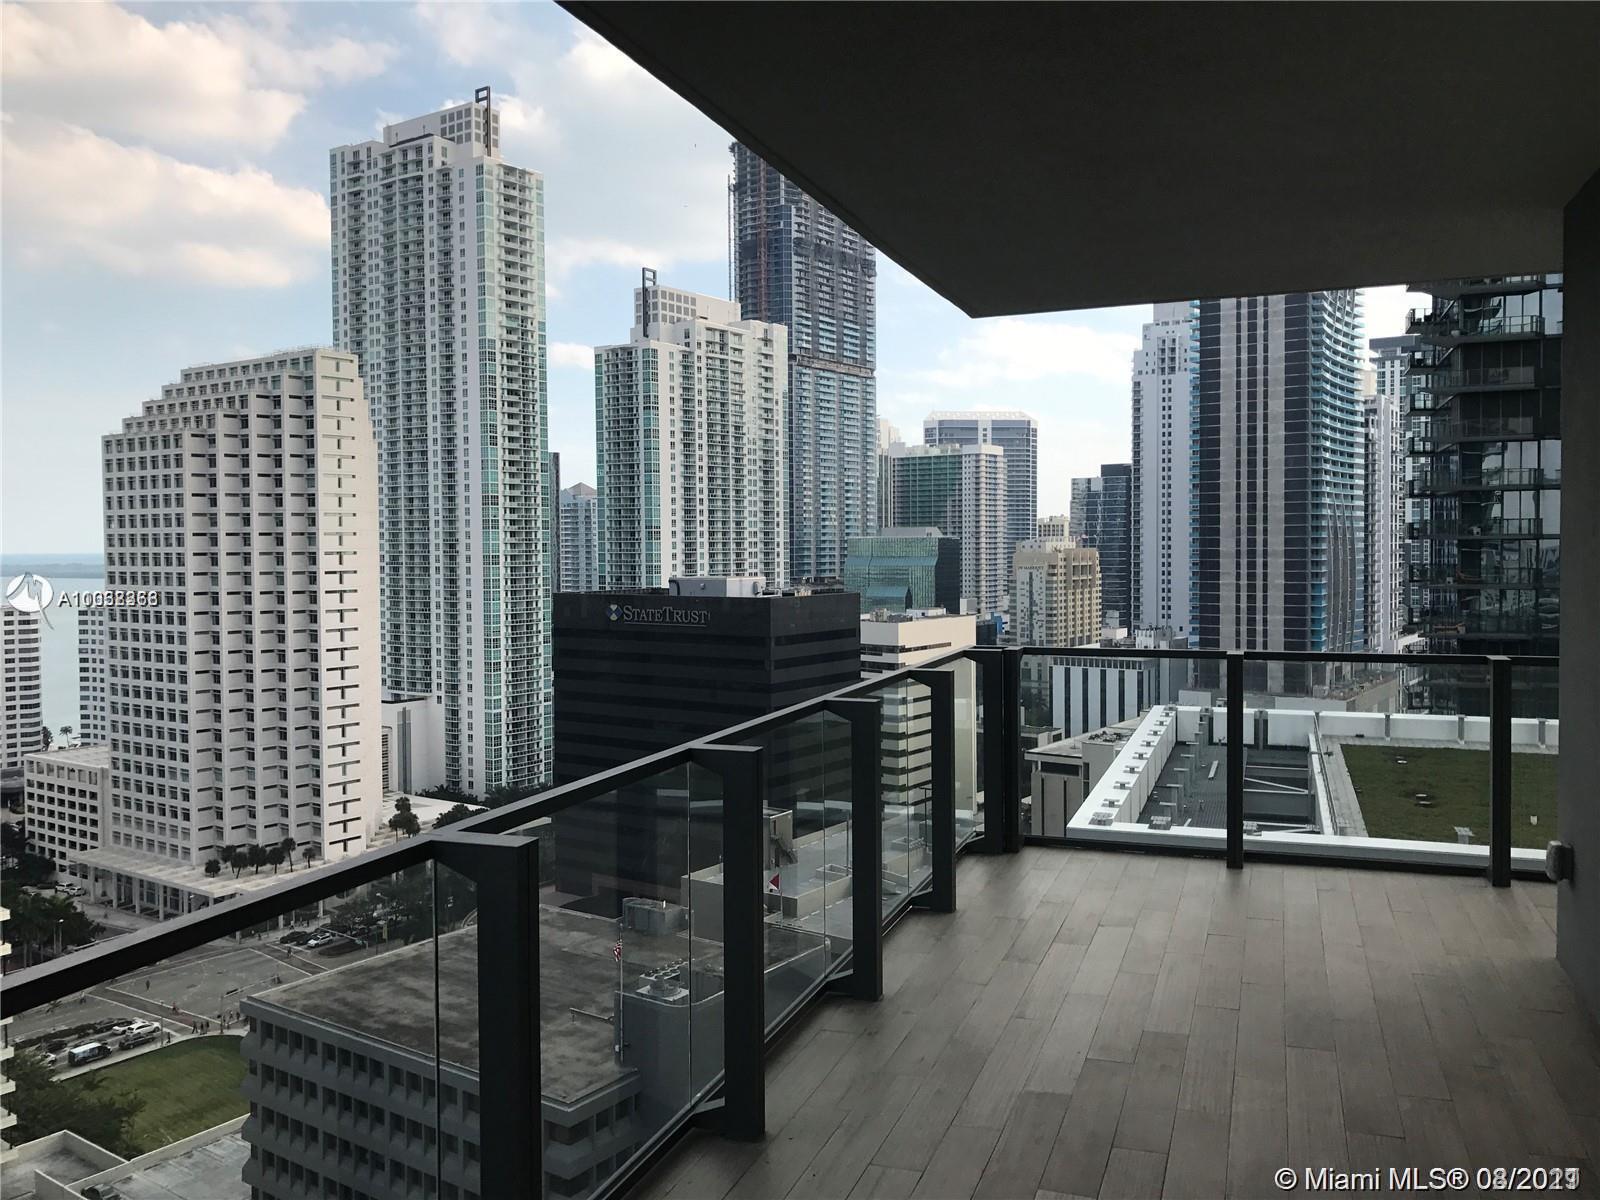 Beautiful apartment, Reach at Brickell City Centre. Spacious 2 bed/2.5 bath plus den. Building features 24 hour concierge, half-acre amenity deck which includes gardens, fitness center and children's play area. Floor to ceiling sliding glass doors throughout unit. Fully finished walk in closet and modern Italian cabinetry for both kitchen and bathrooms.